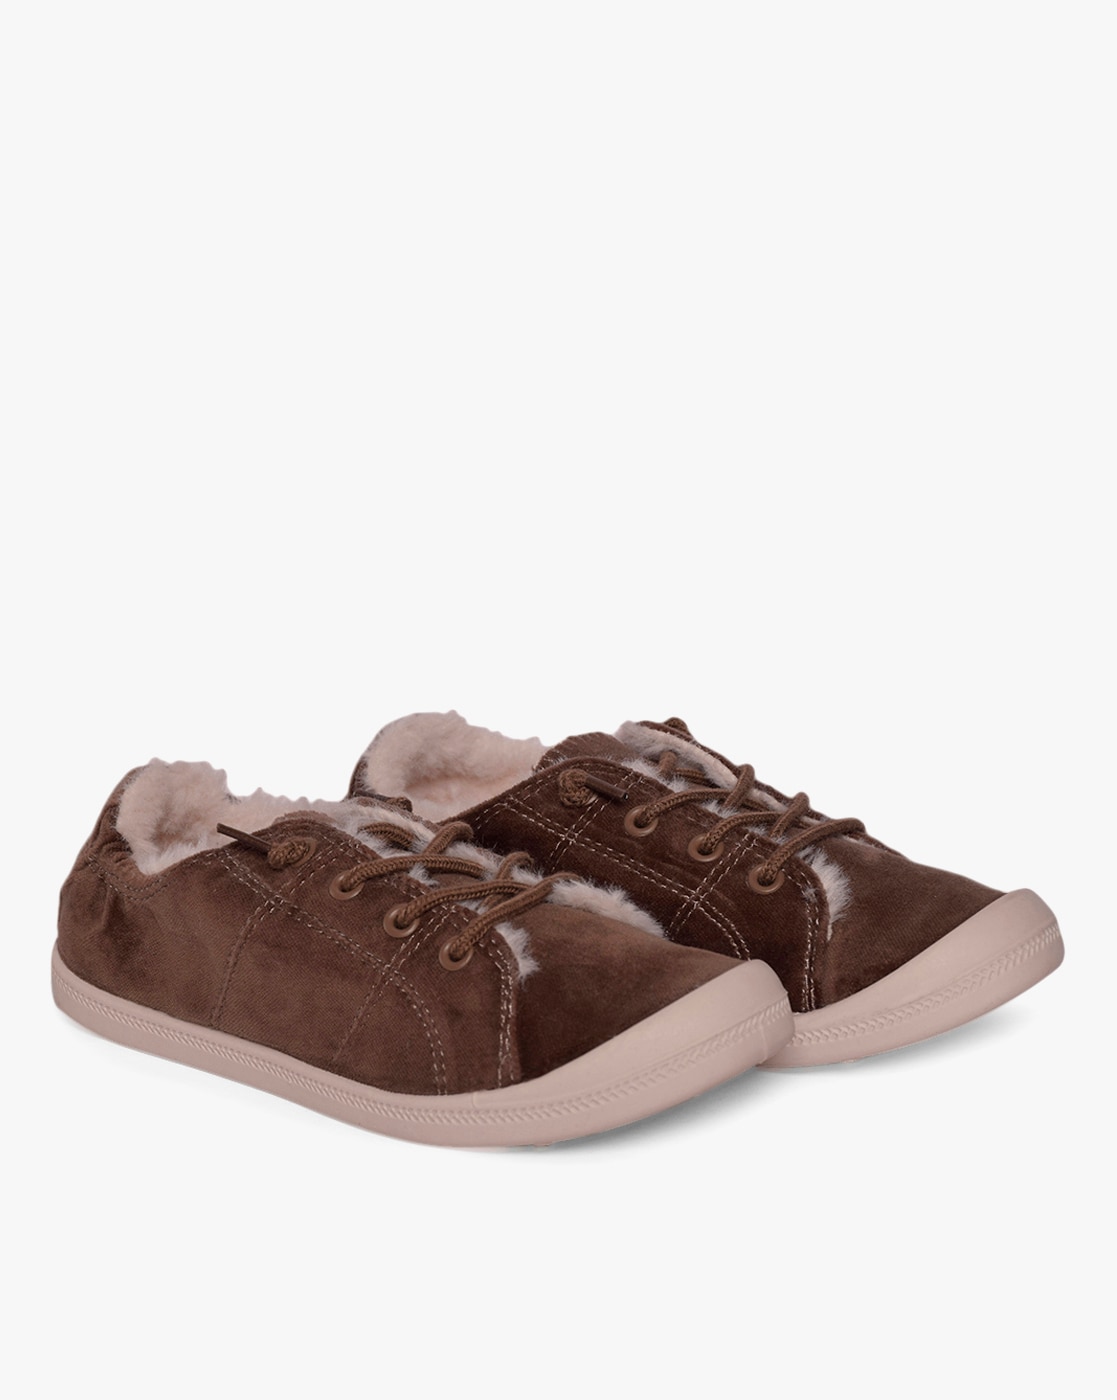 Brown Sneakers for Women by MADDEN GIRL 